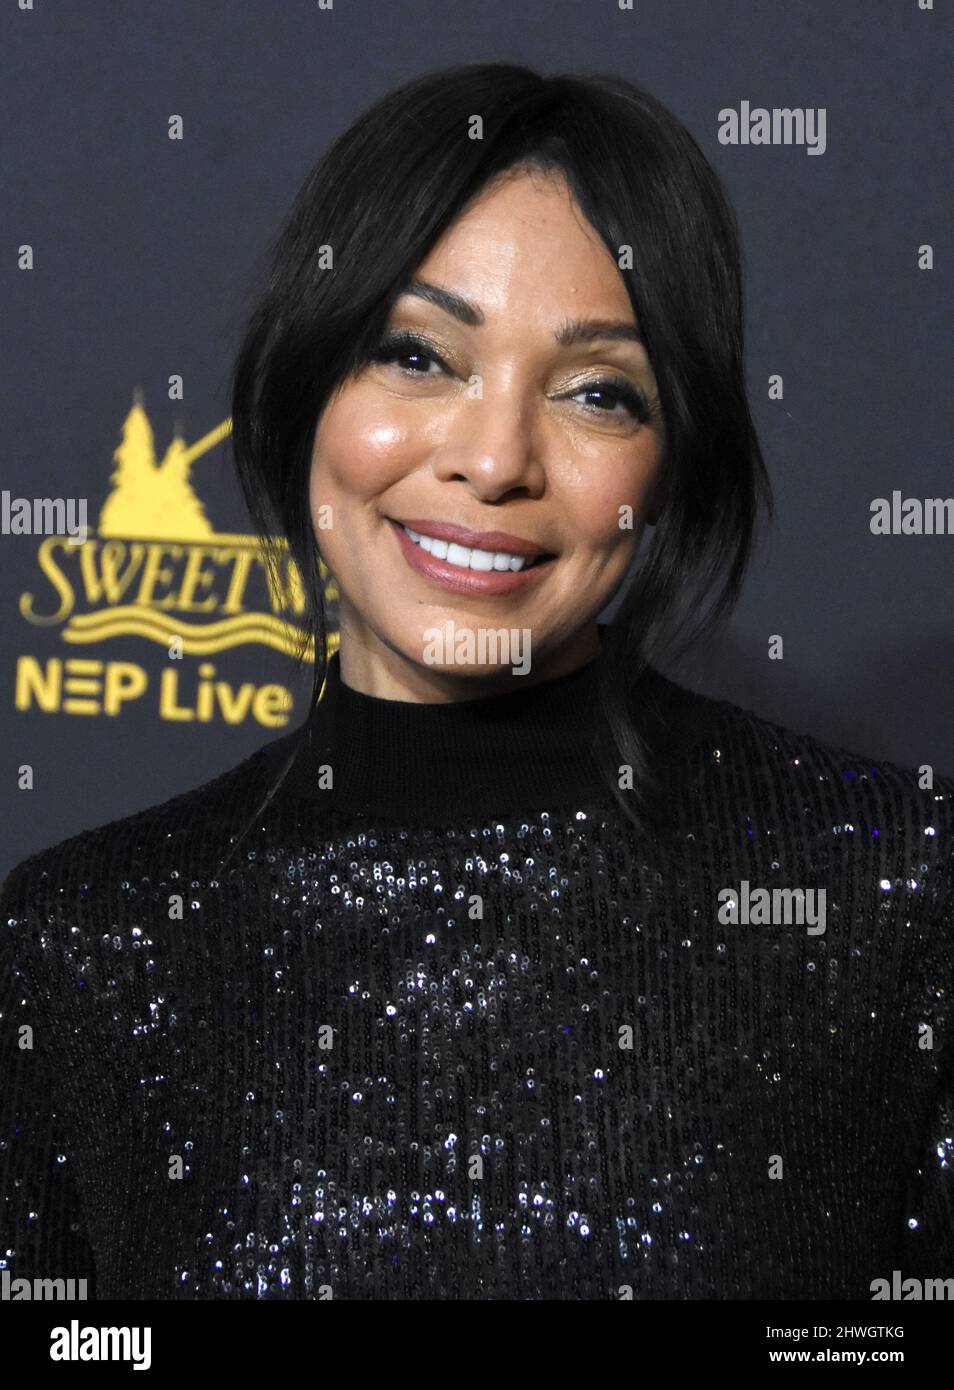 Tamara Taylor, who portrays Dr. Camille Saroyan in the television crime  drama Bones, attends the show's 100th episode celebration in West  Holywood, California on April 7, 2010. UPI/Jim Ruymen Stock Photo - Alamy